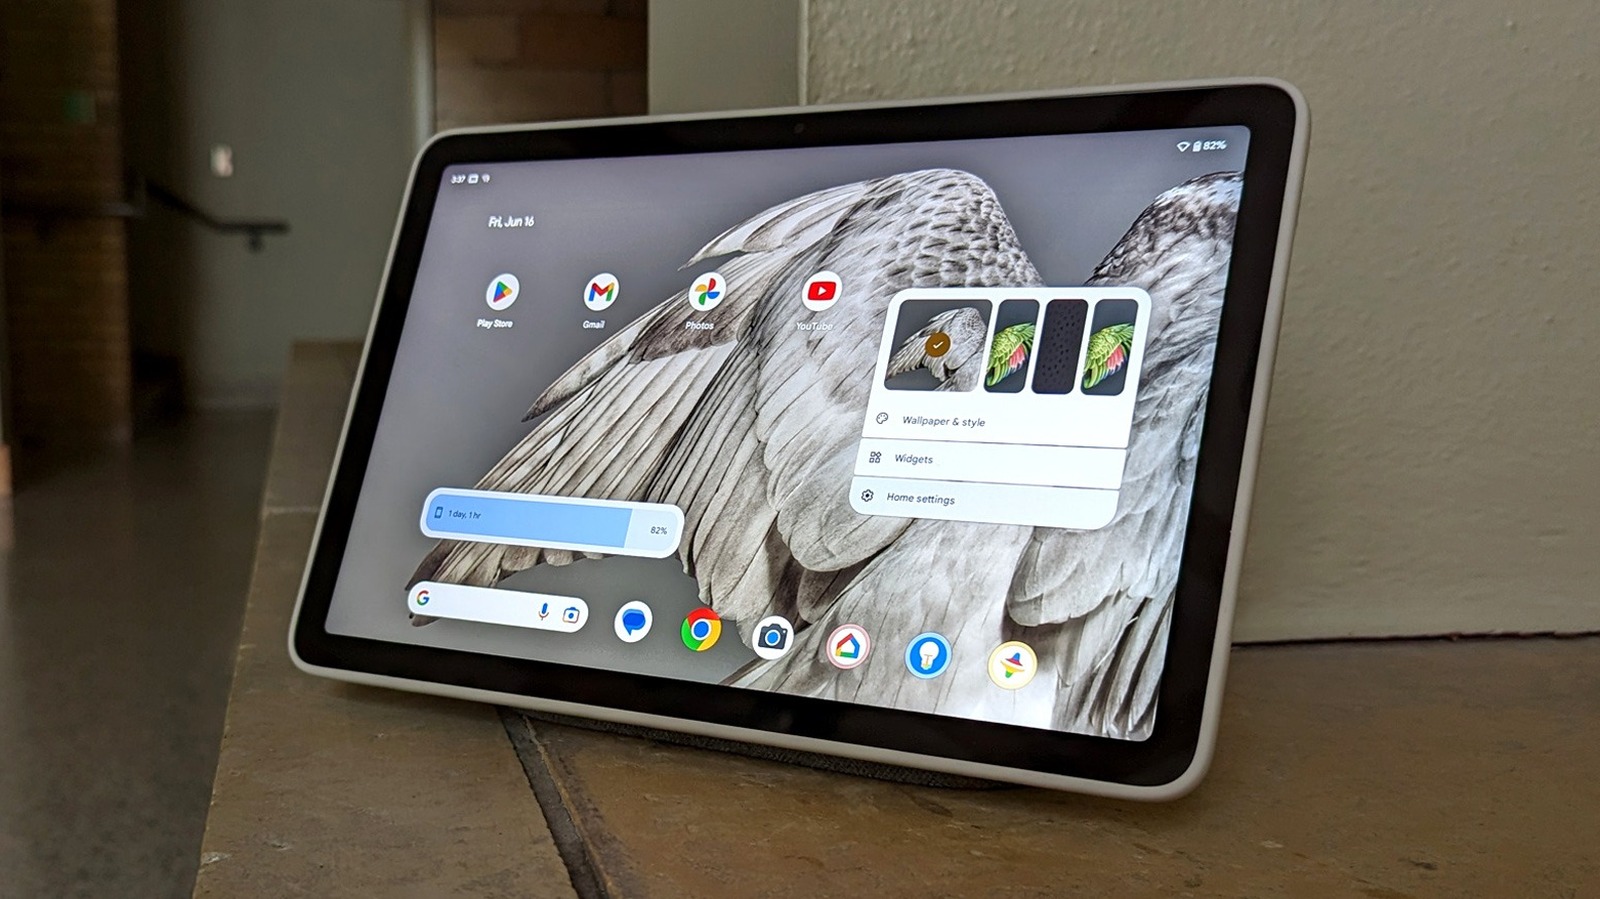 The New Google Pixel Tablet - Google Store